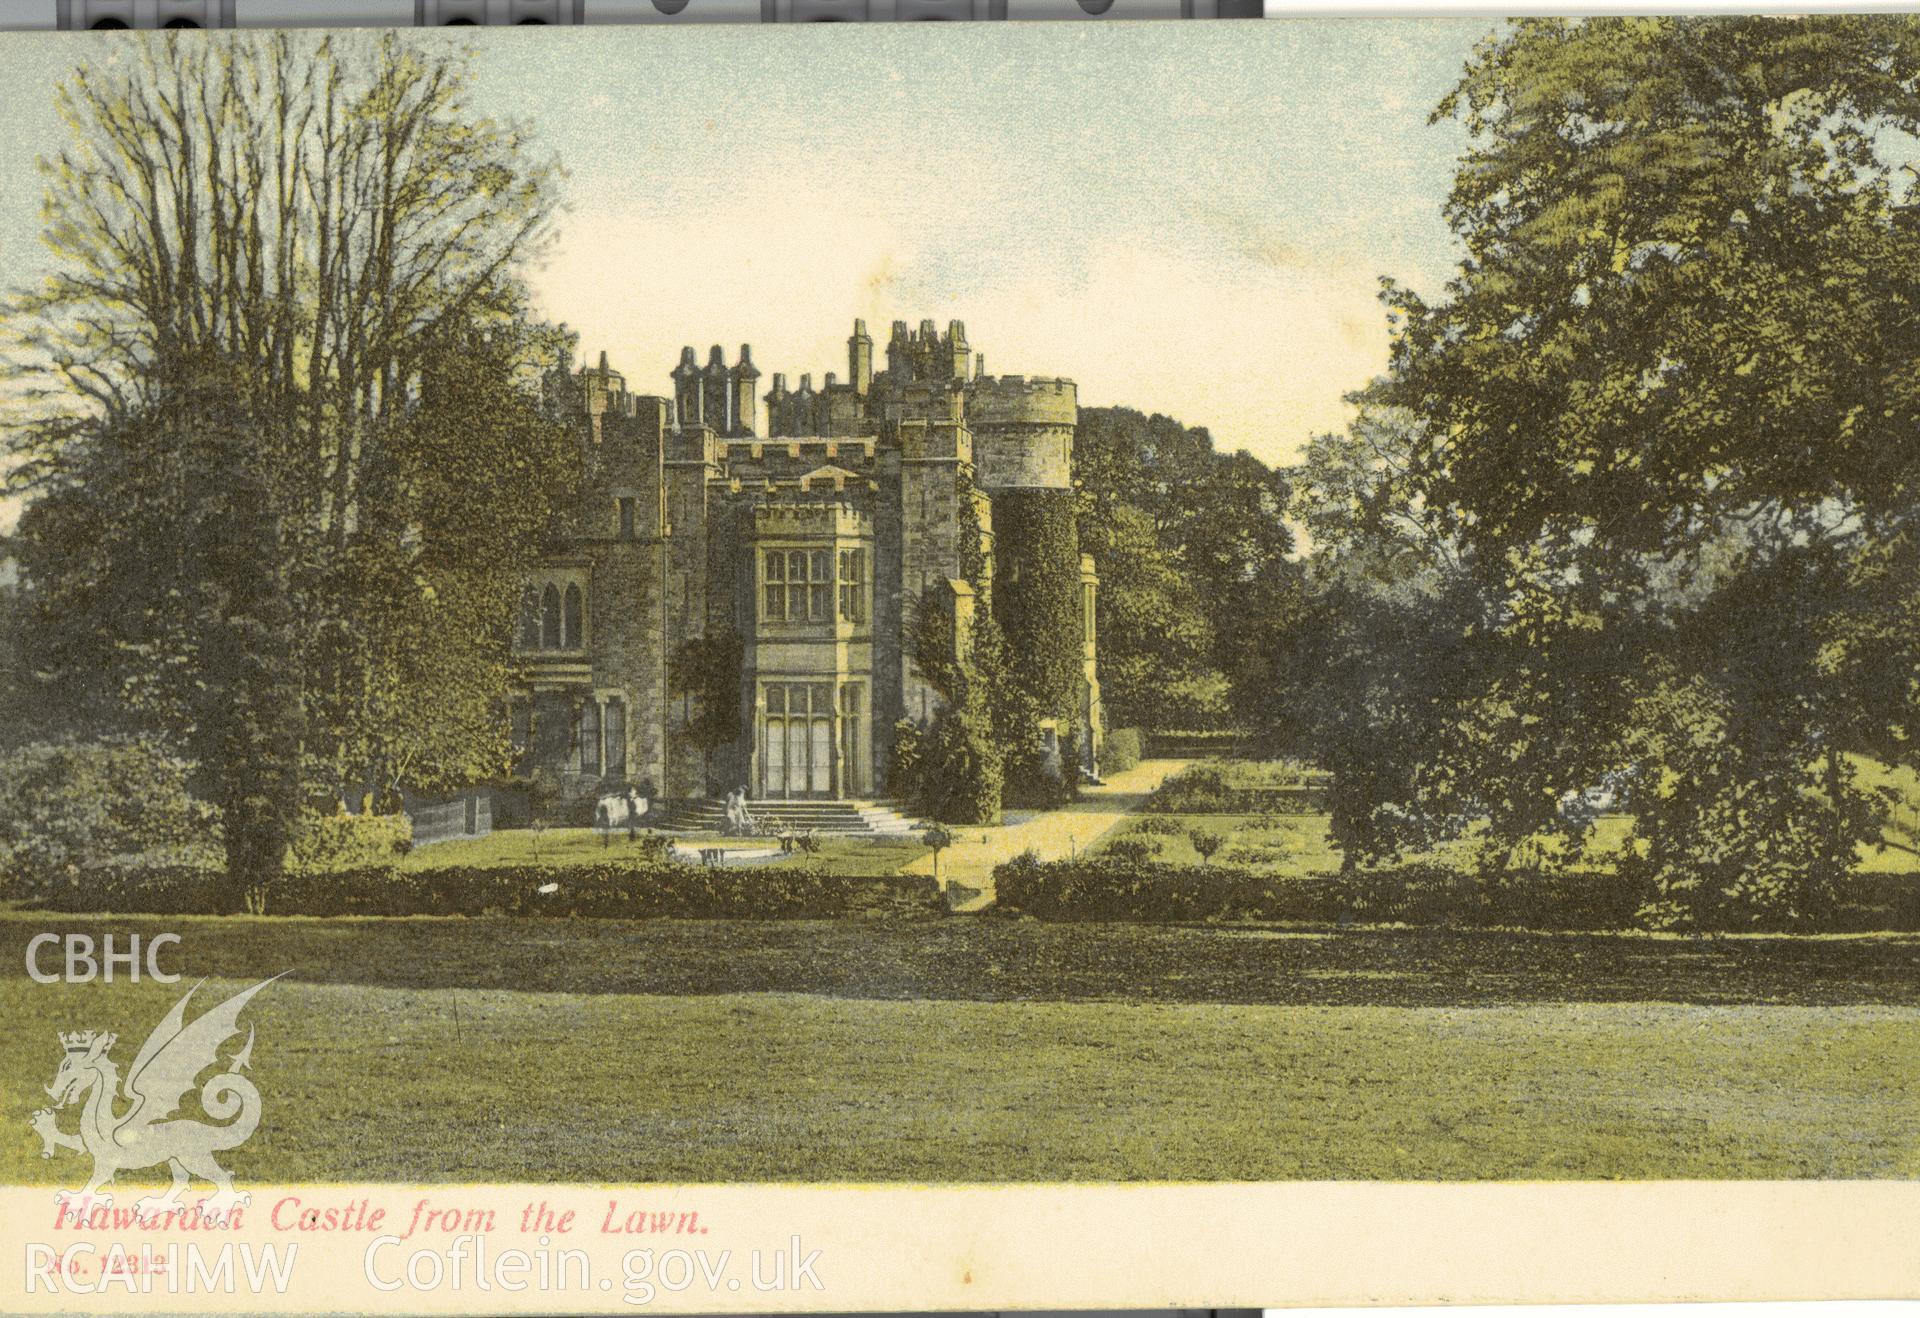 Digitised postcard image of Hawarden Castle. Produced by Parks and Gardens Data Services, from an original item in the Peter Davis Collection at Parks and Gardens UK. We hold only web-resolution images of this collection, suitable for viewing on screen and for research purposes only. We do not hold the original images, or publication quality scans.